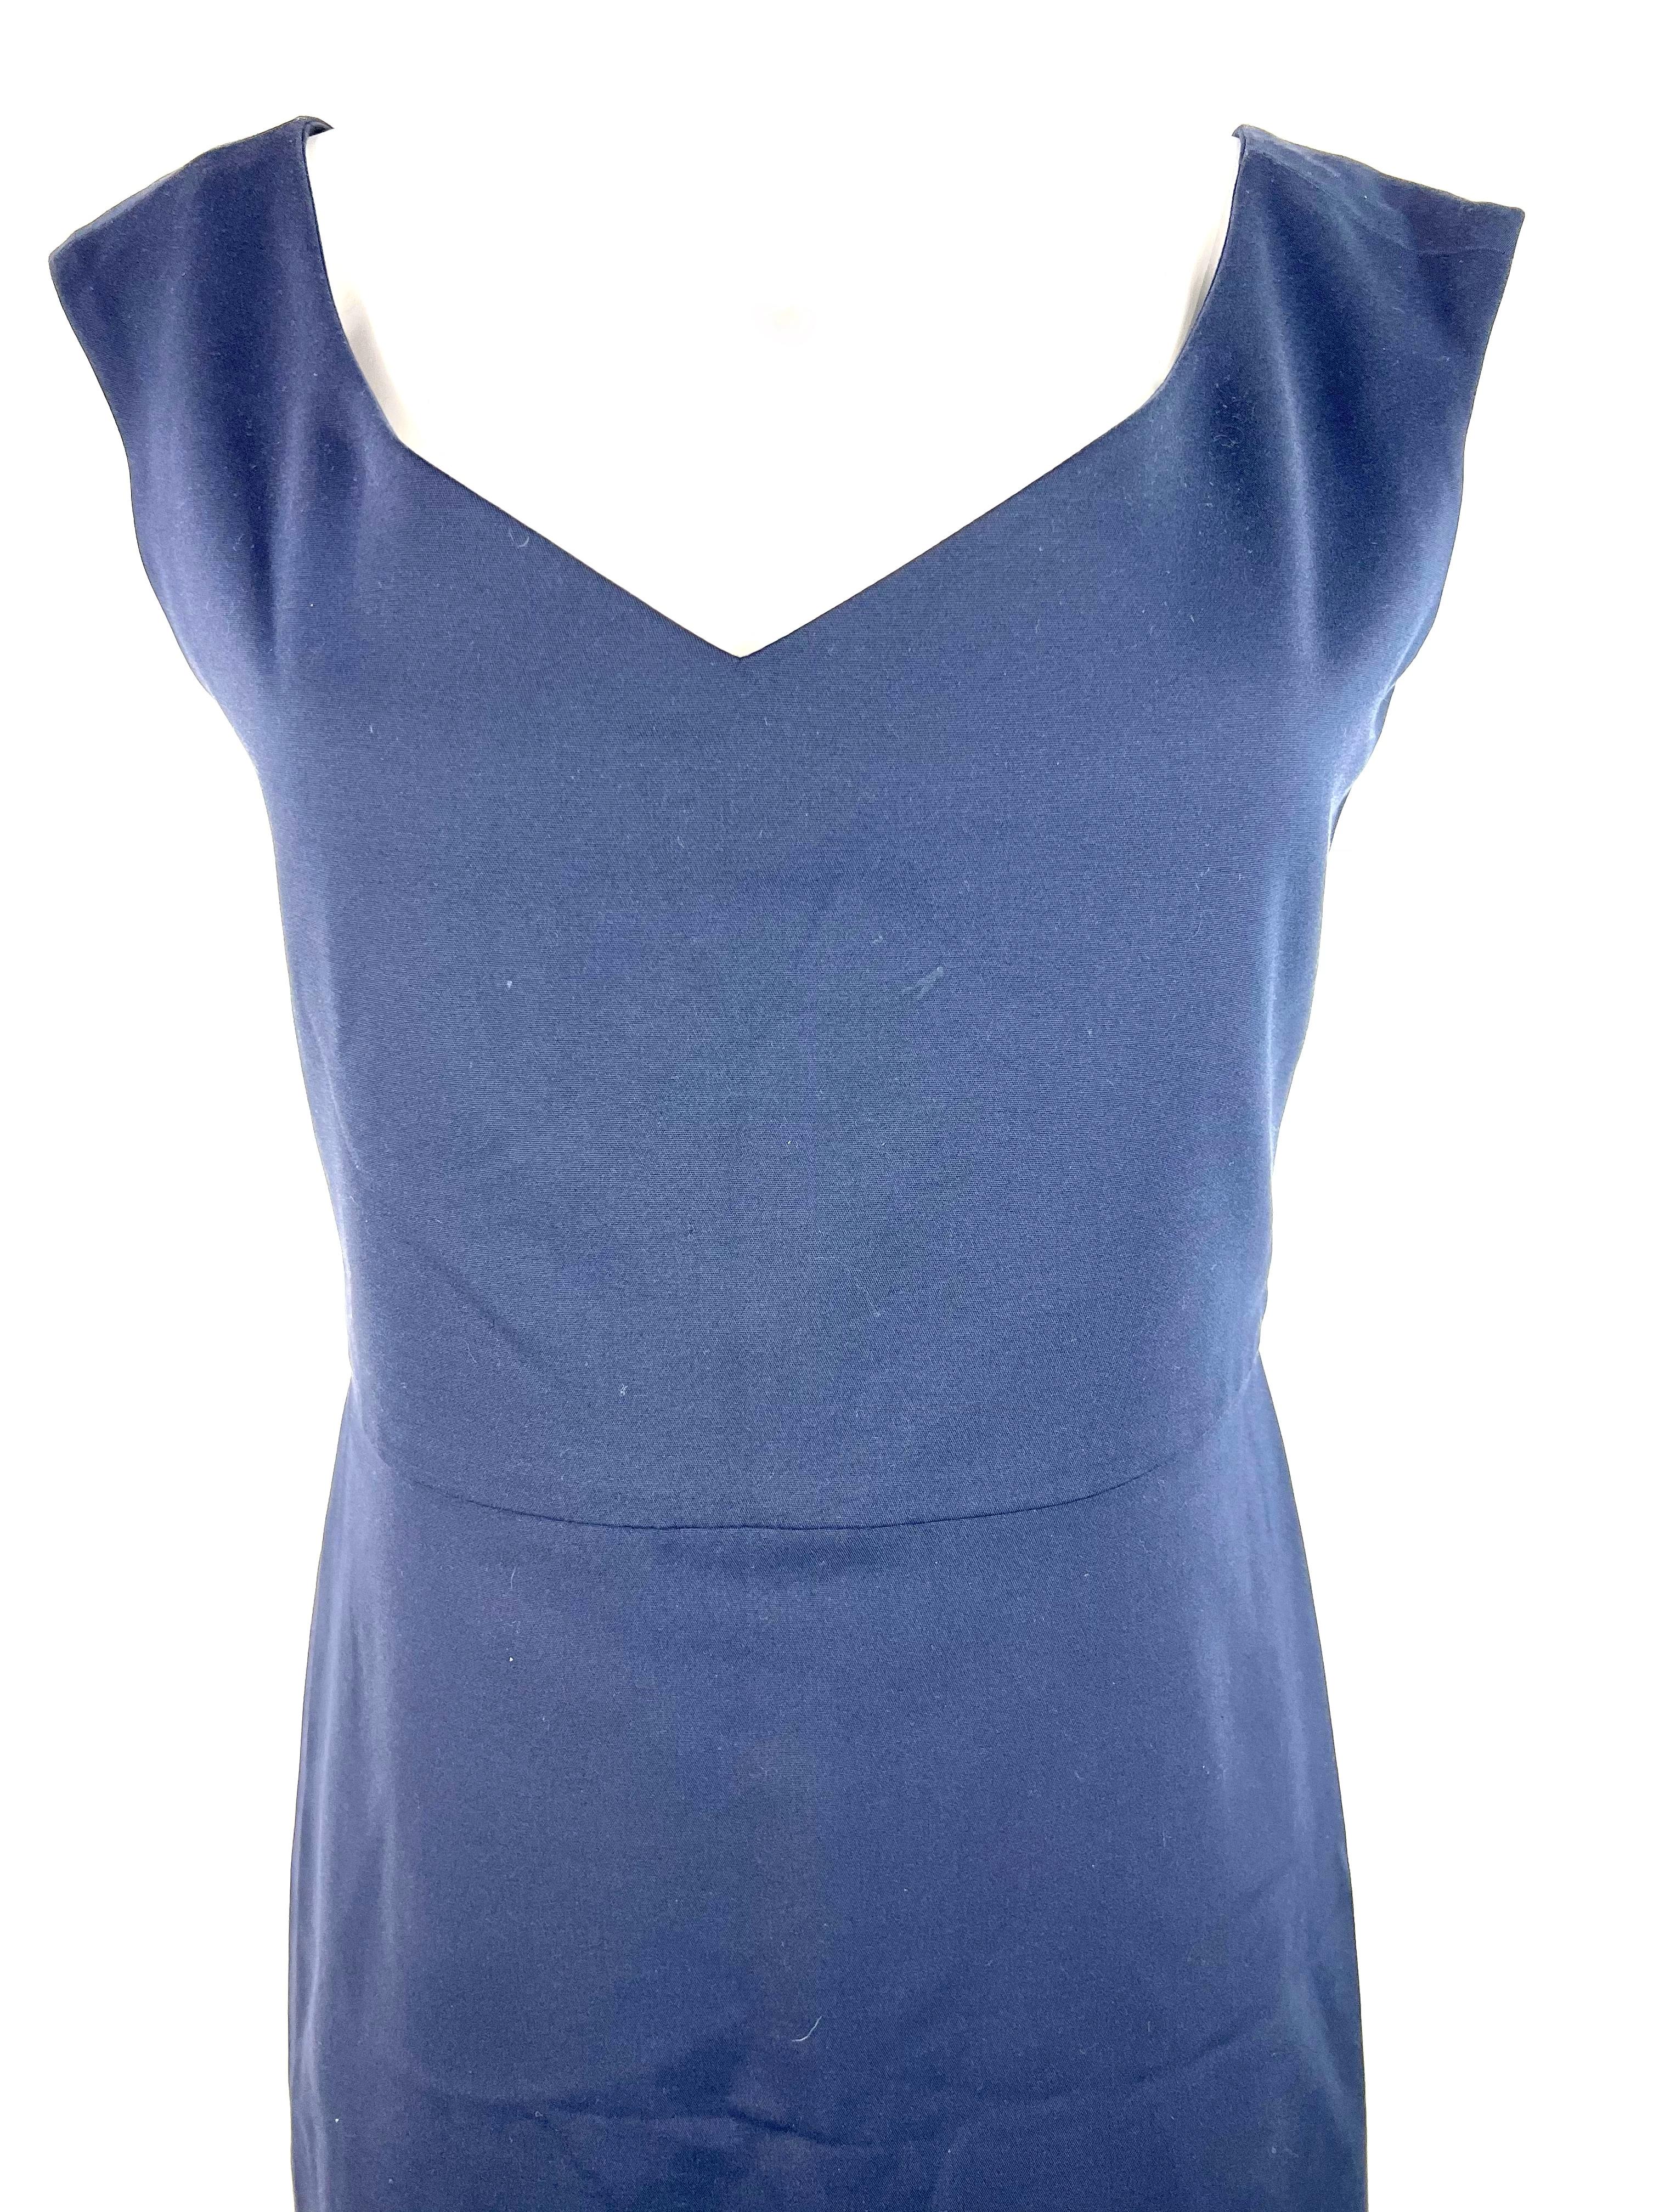 Product details:

The dress features v neck line, off shoulder style with pencil skirt detail.